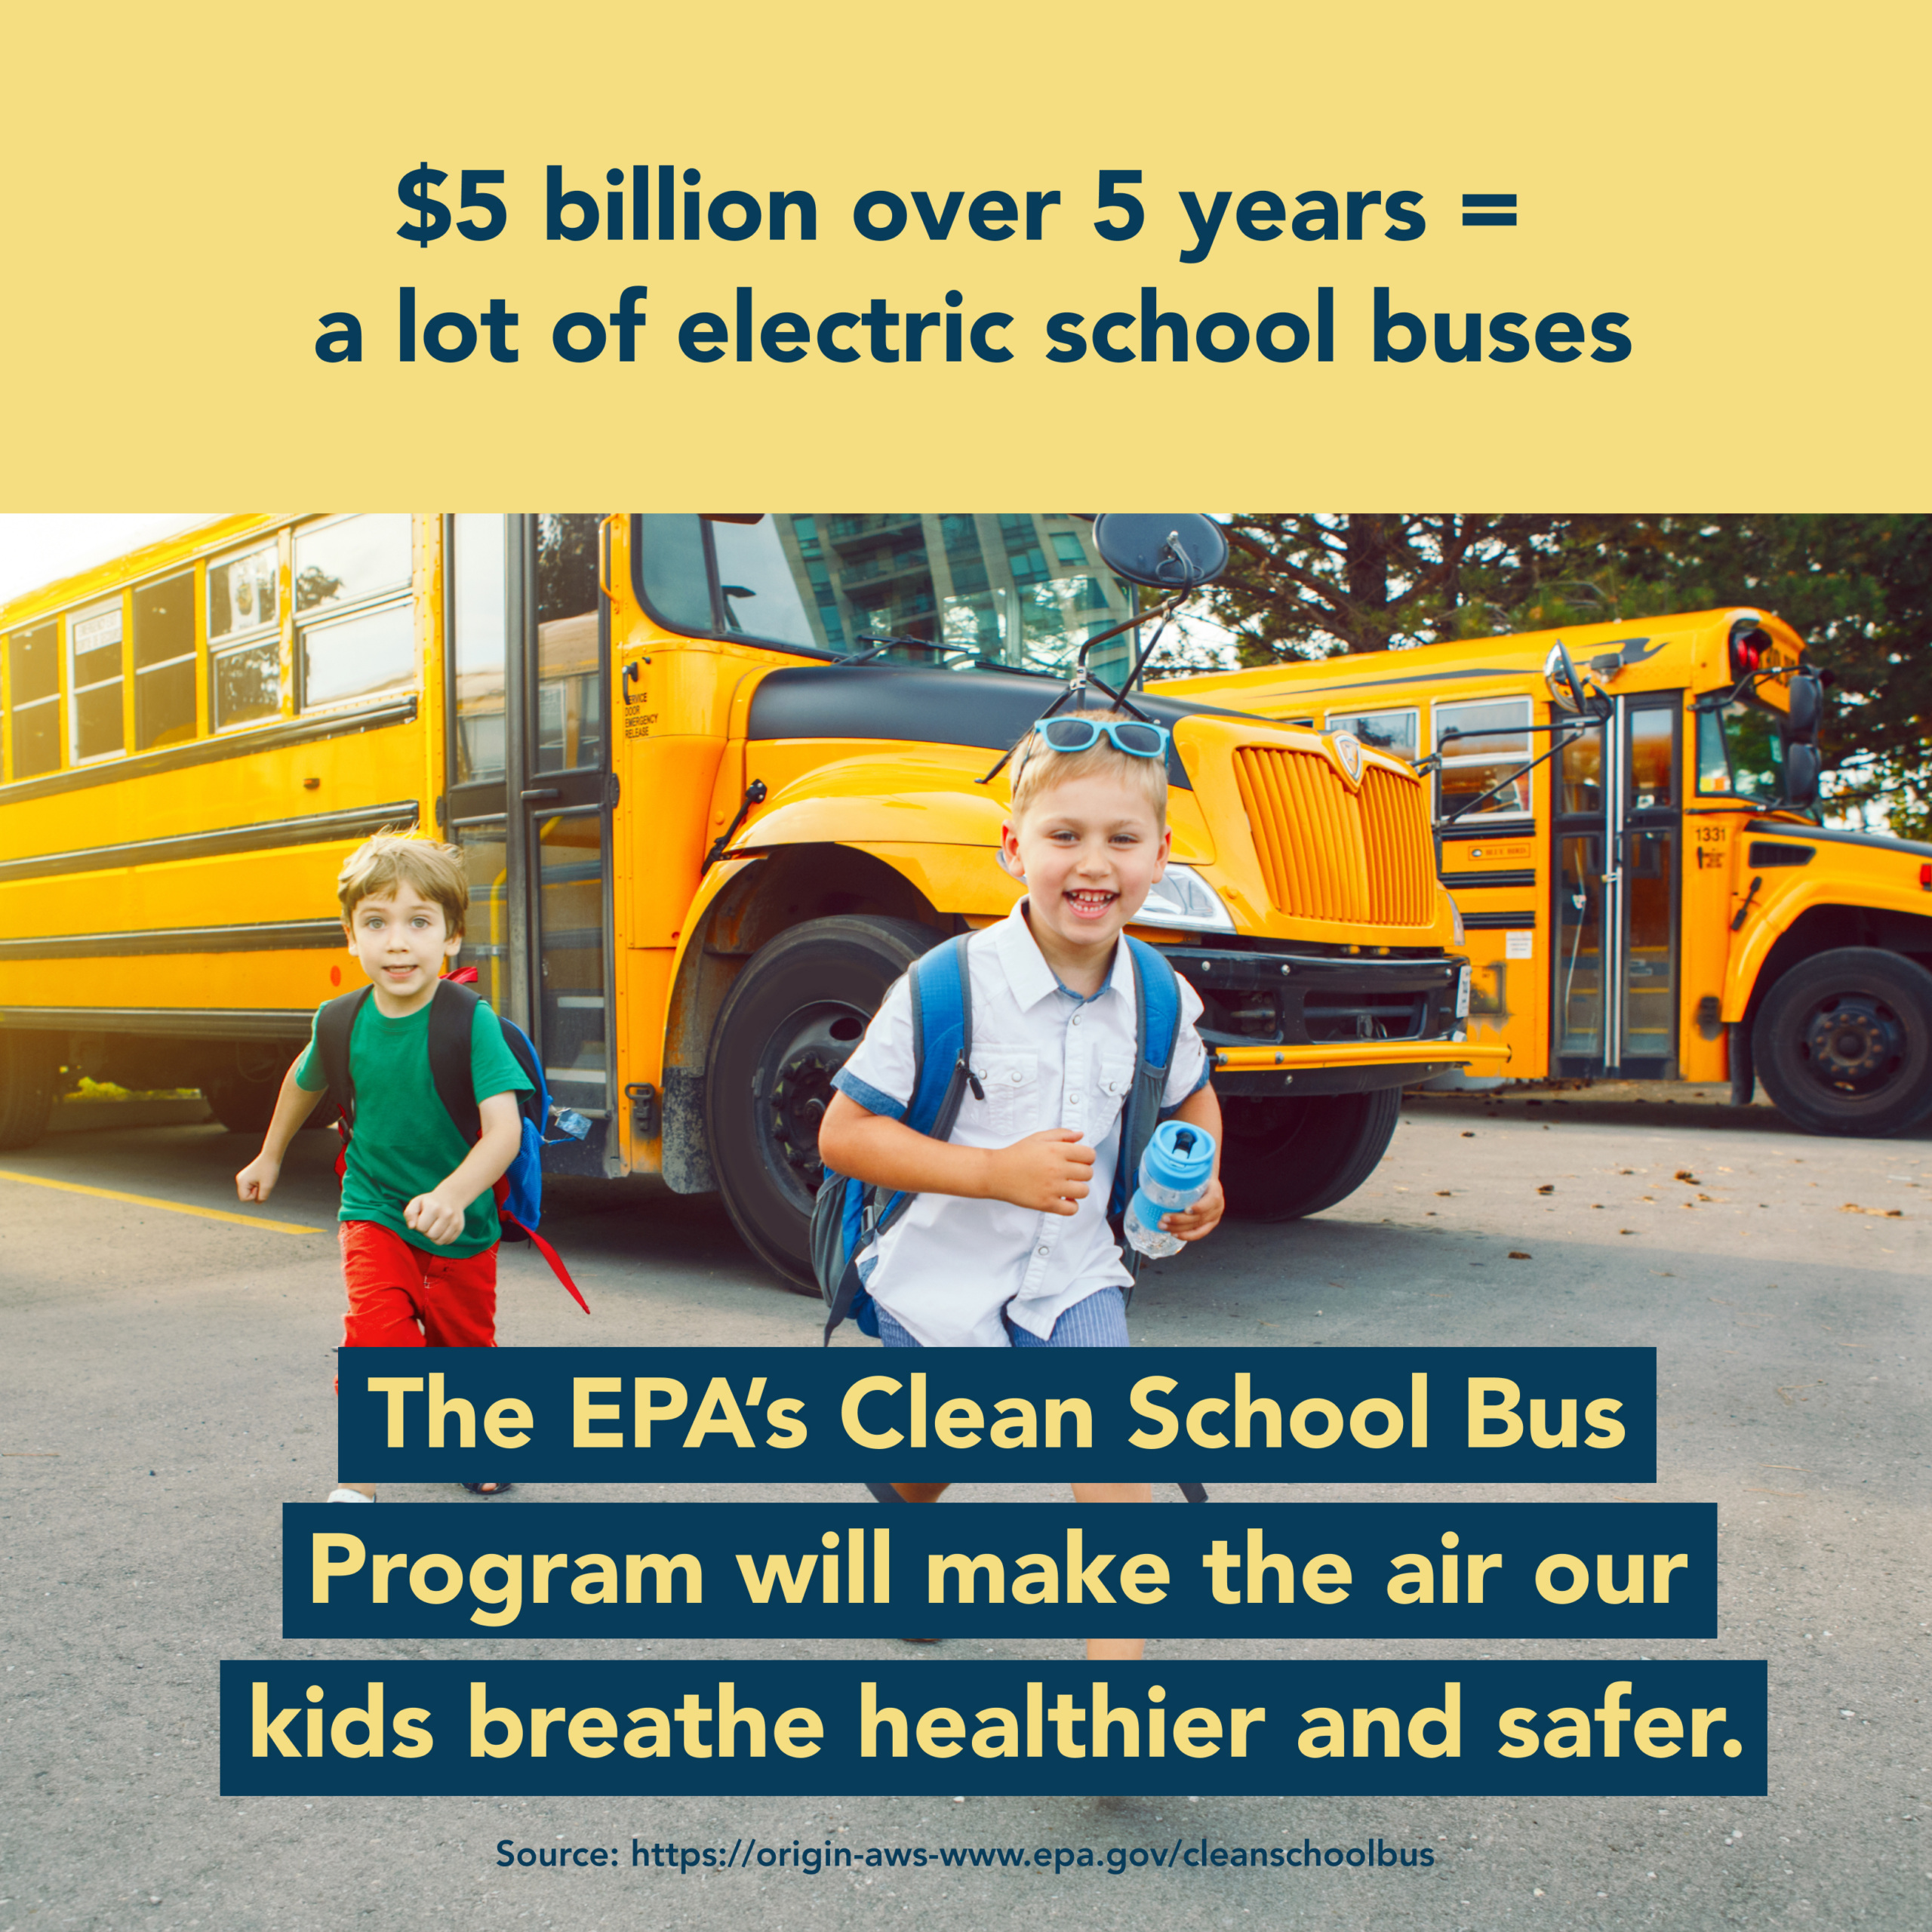 A photo of two children getting off a school bus. There is text superimposed above and below them that reads $5 billion over 5 years = a lot of electric school busses. The EPA's Clean School Bus Program will make the air our kids breathe healthier and safer. 